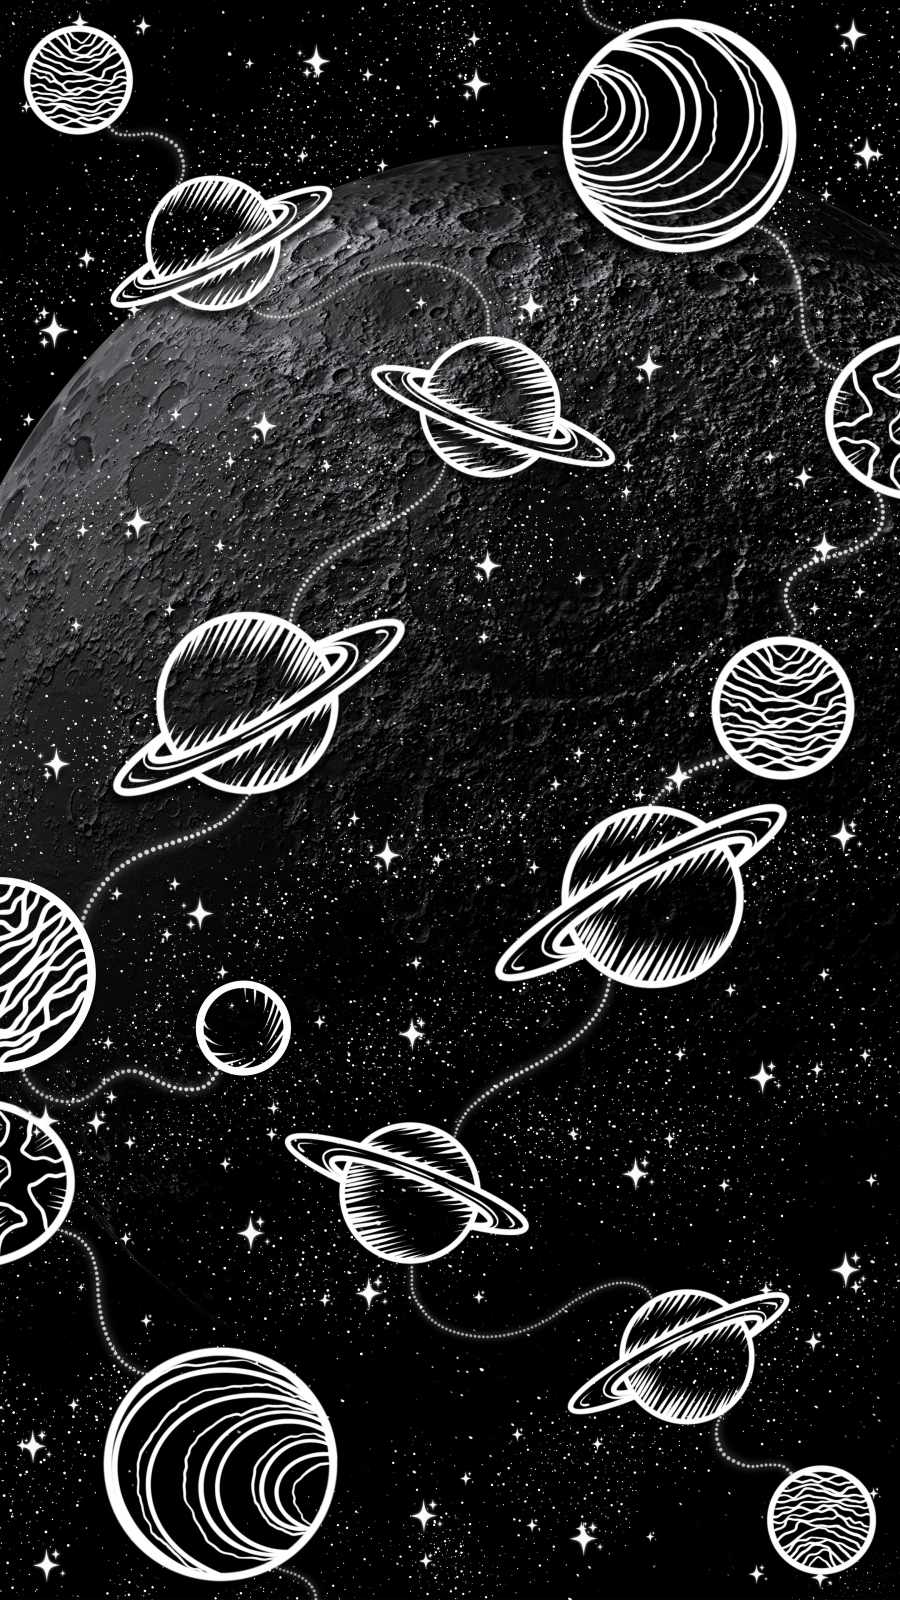 Space Map IPhone Wallpaper - IPhone Wallpapers : iPhone Wallpapers